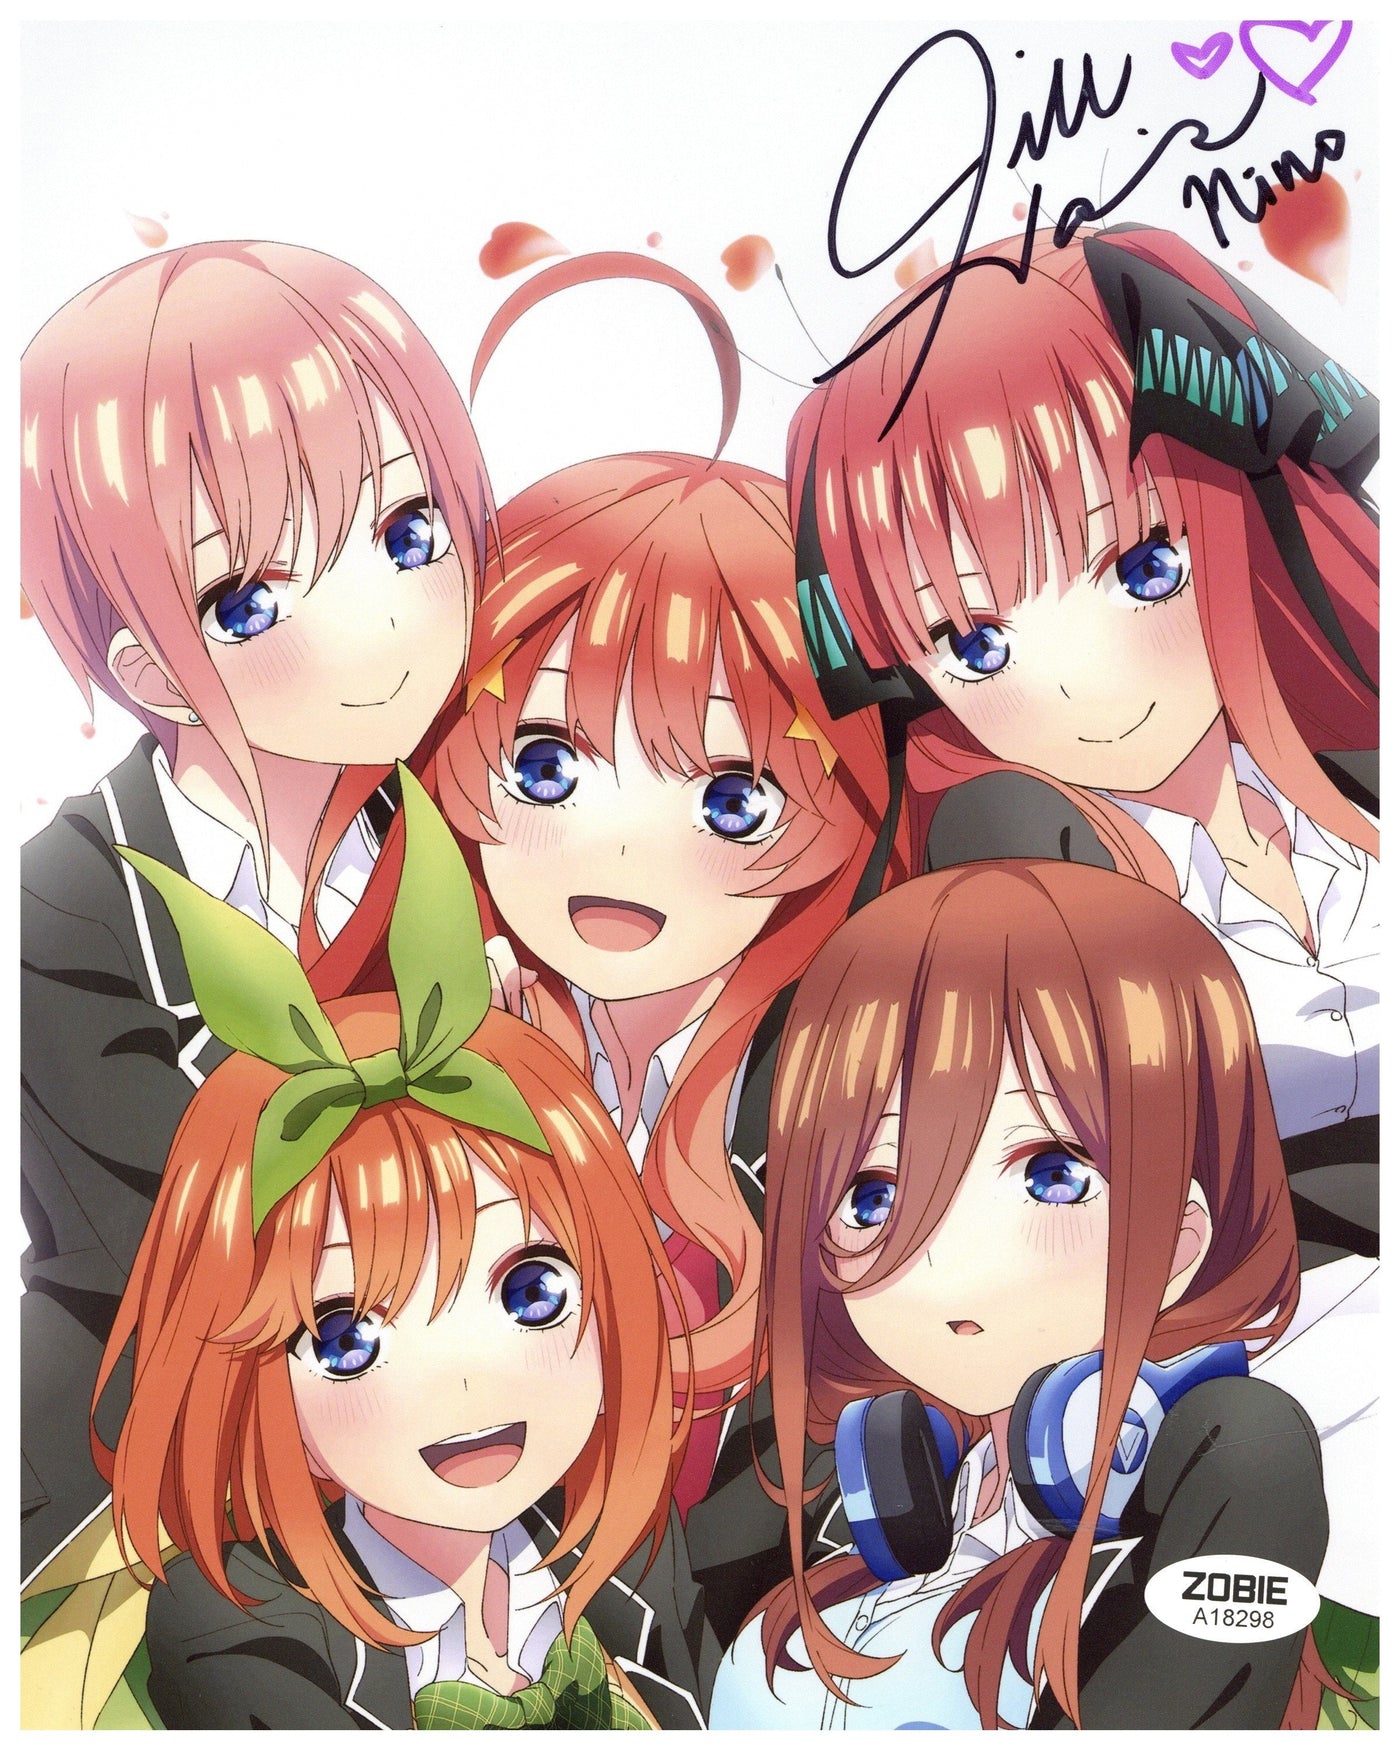 Jill Harris Signed 8x10 Photo The Quintessential Quintuplets Autographed Zobie COA in